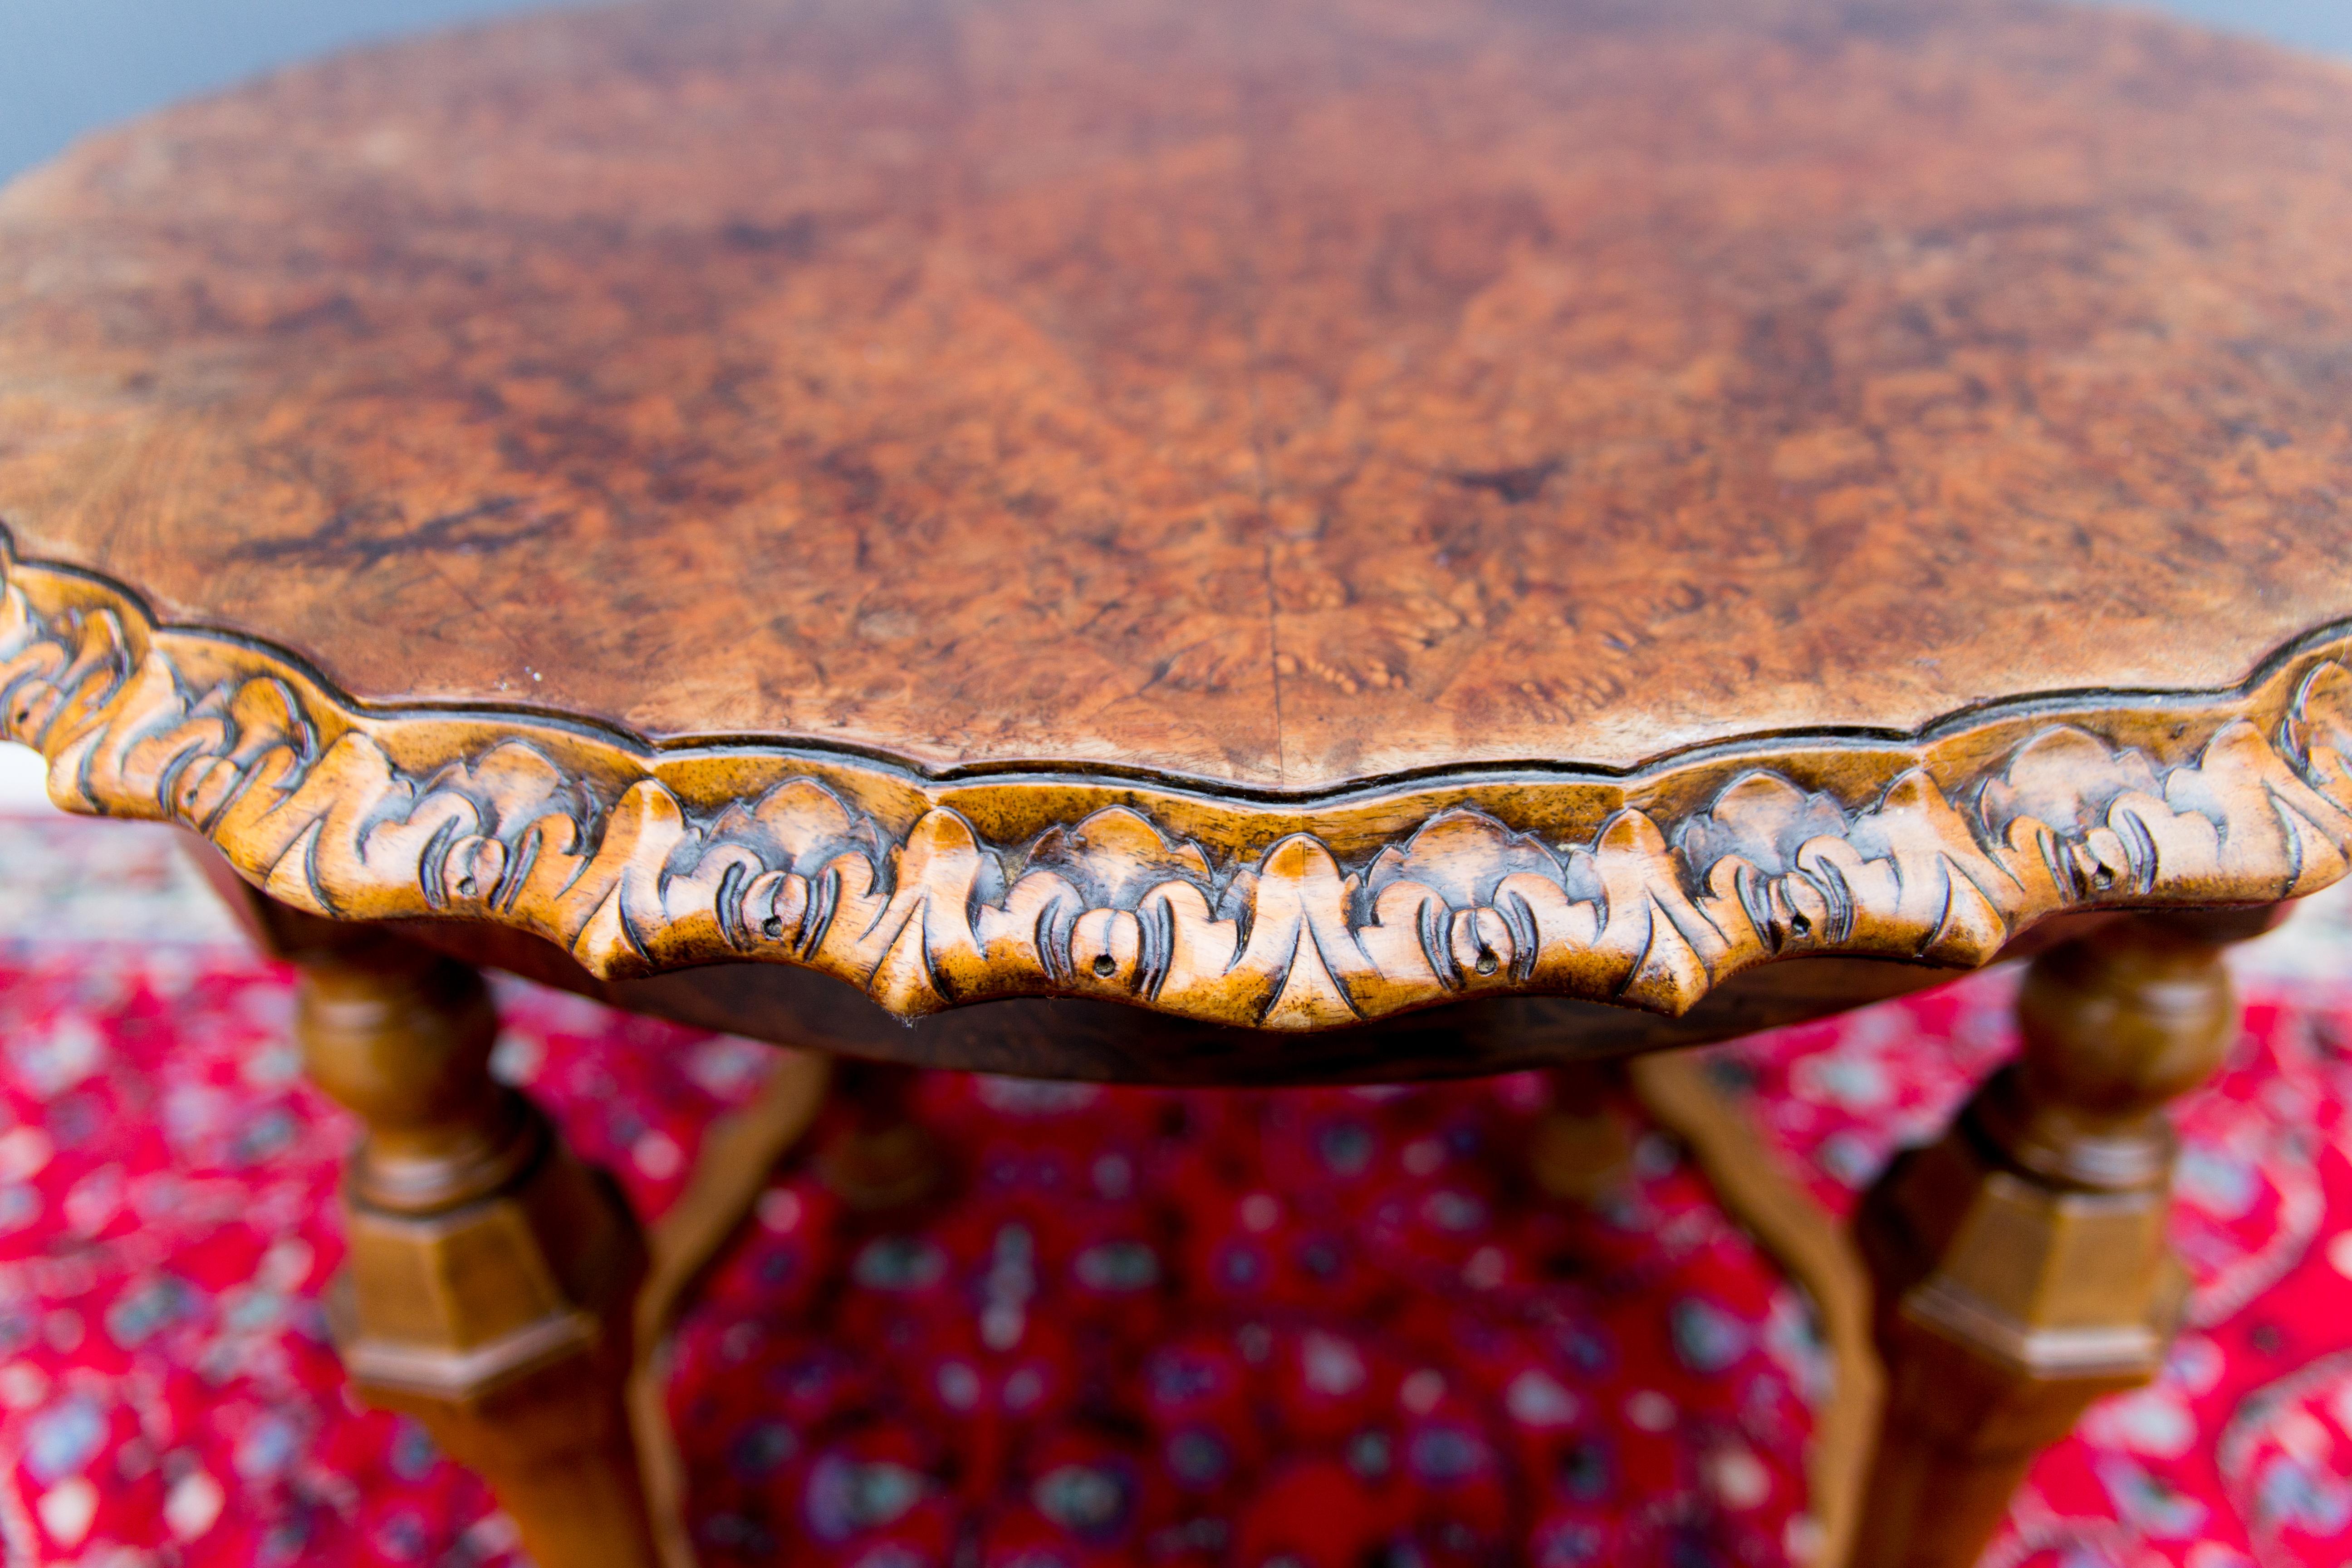 Antique French burr walnut coffee table, circa 1920.
A beautifully shaped round coffee table made from walnut with a burr walnut top and carved-shaped edges. France, circa the 1920s.
Measurements:
Height: 58 cm / 22.83 in
Width: 60 x 60 cm / 23.62 x